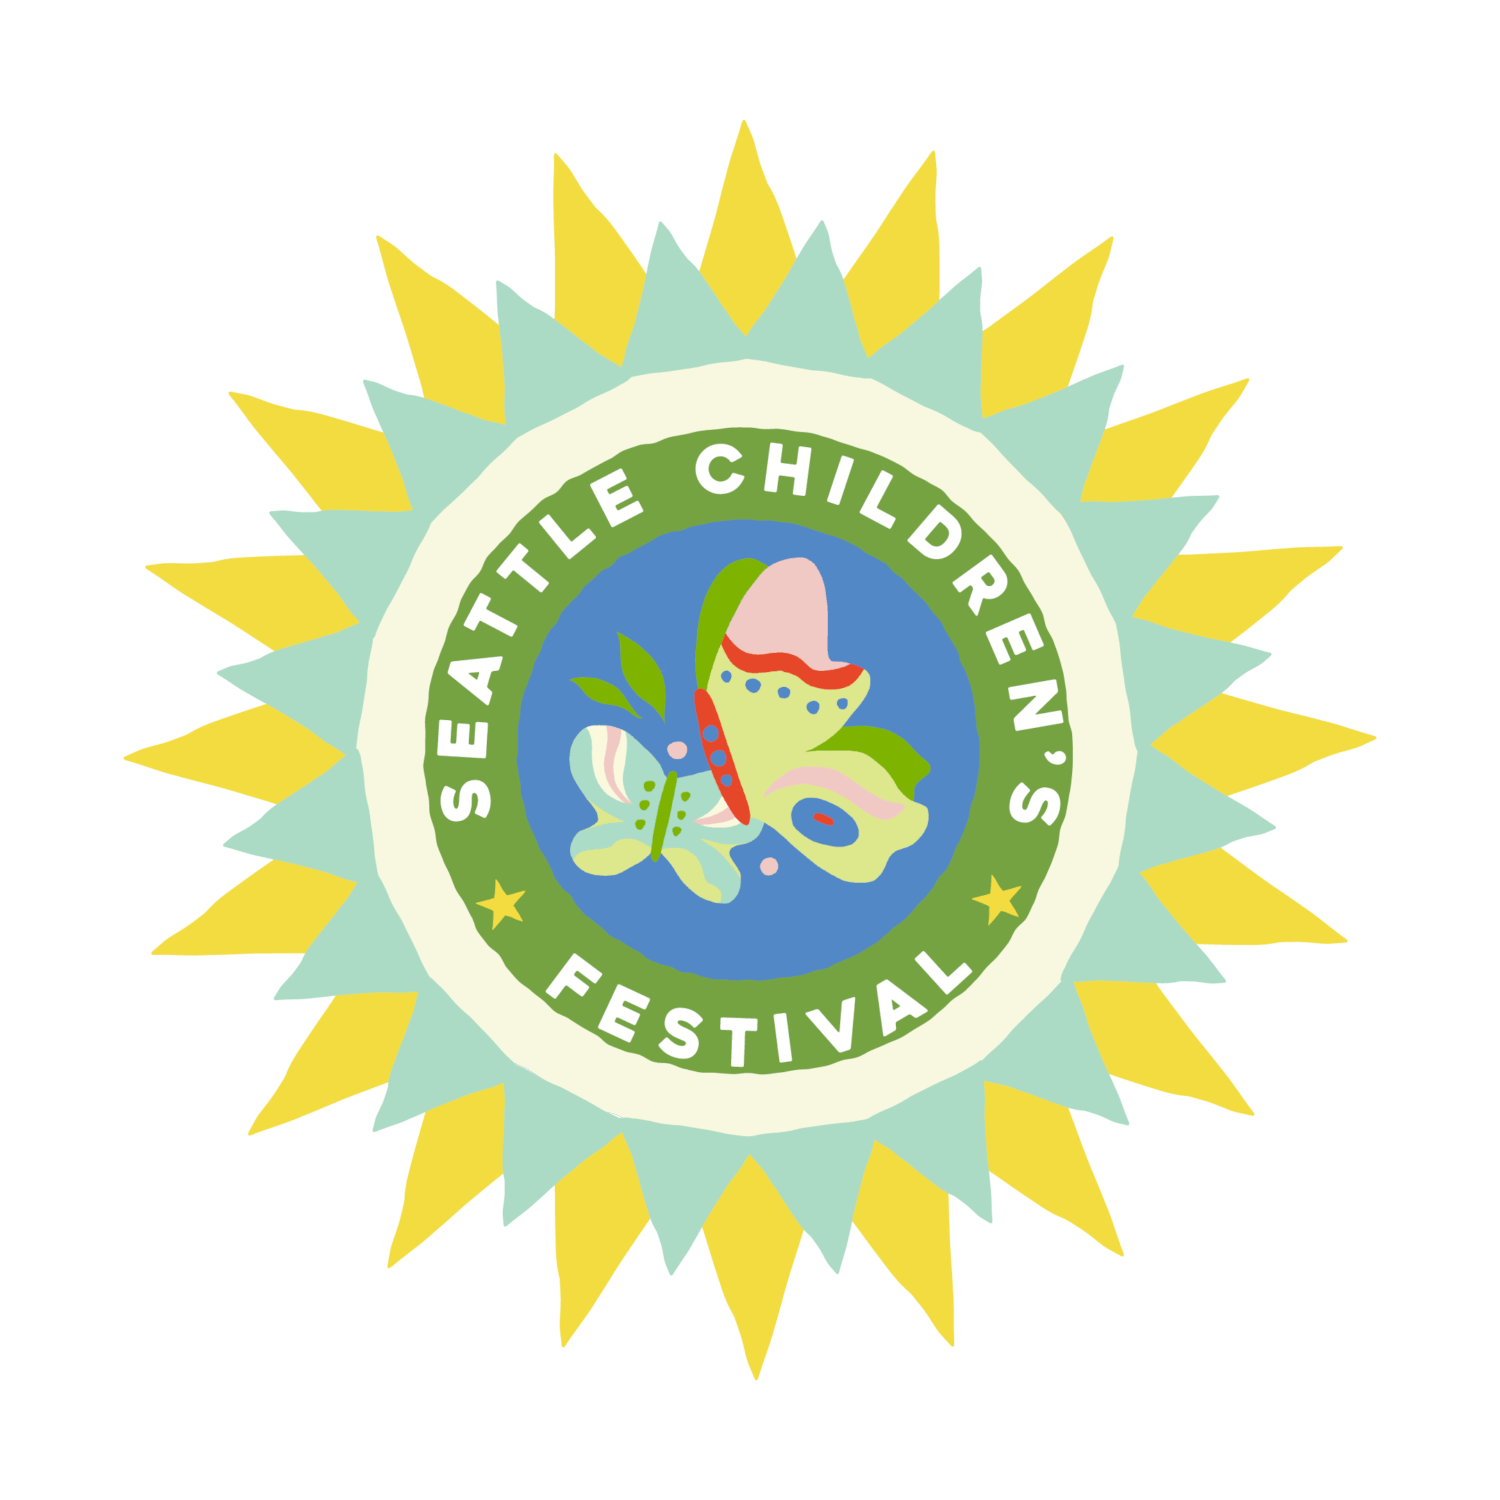 Children's Festival Logo - colorful butterflies in front of a blue background in a starburst shape